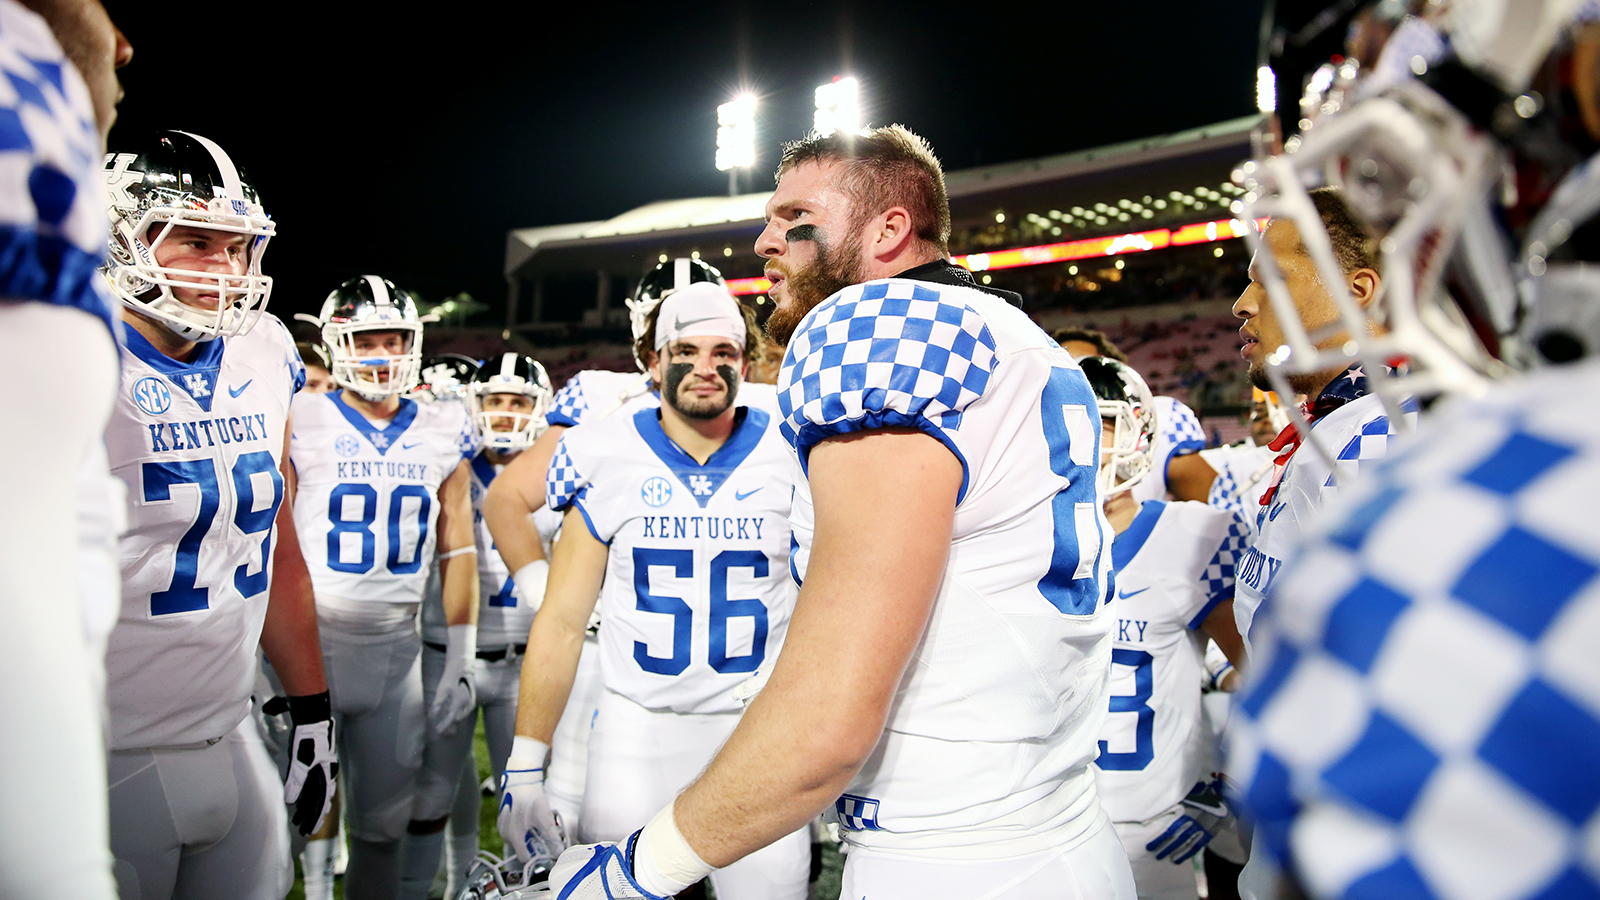 Though a ‘Blessing’, Just Playing in Citrus Bowl Not Enough for Cats